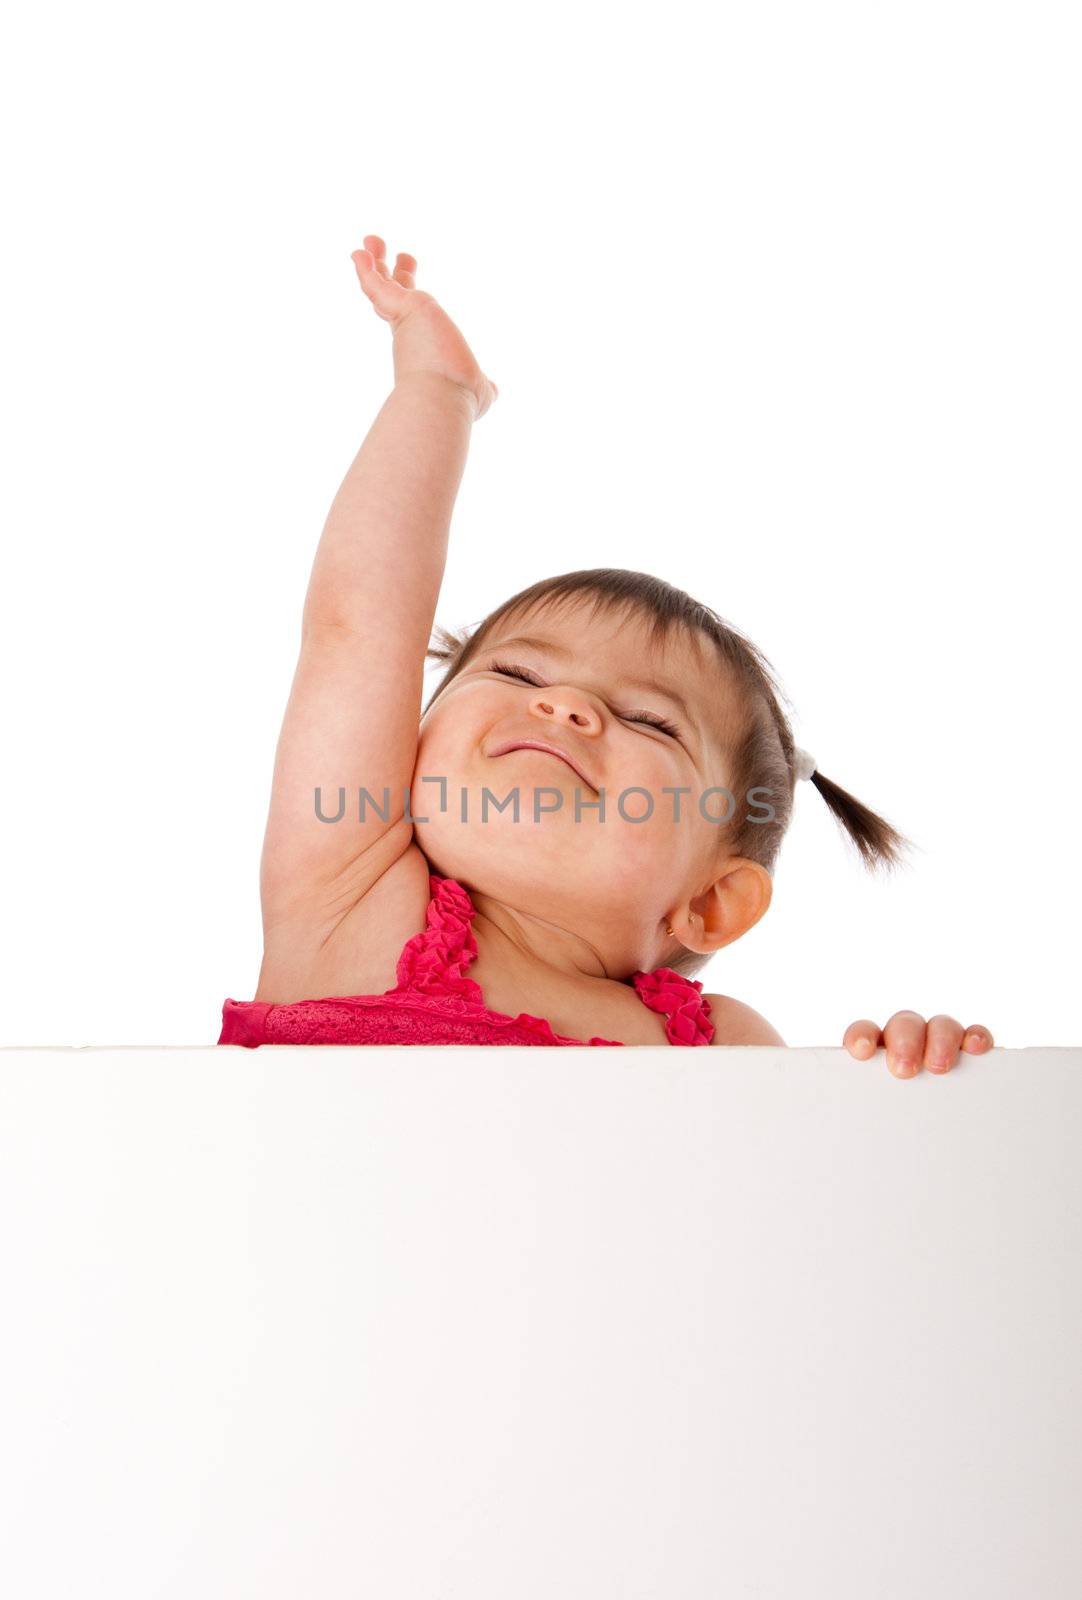 Cute beautiful happy baby infant girl holding white board while reaching up in the air with pride, isolated.